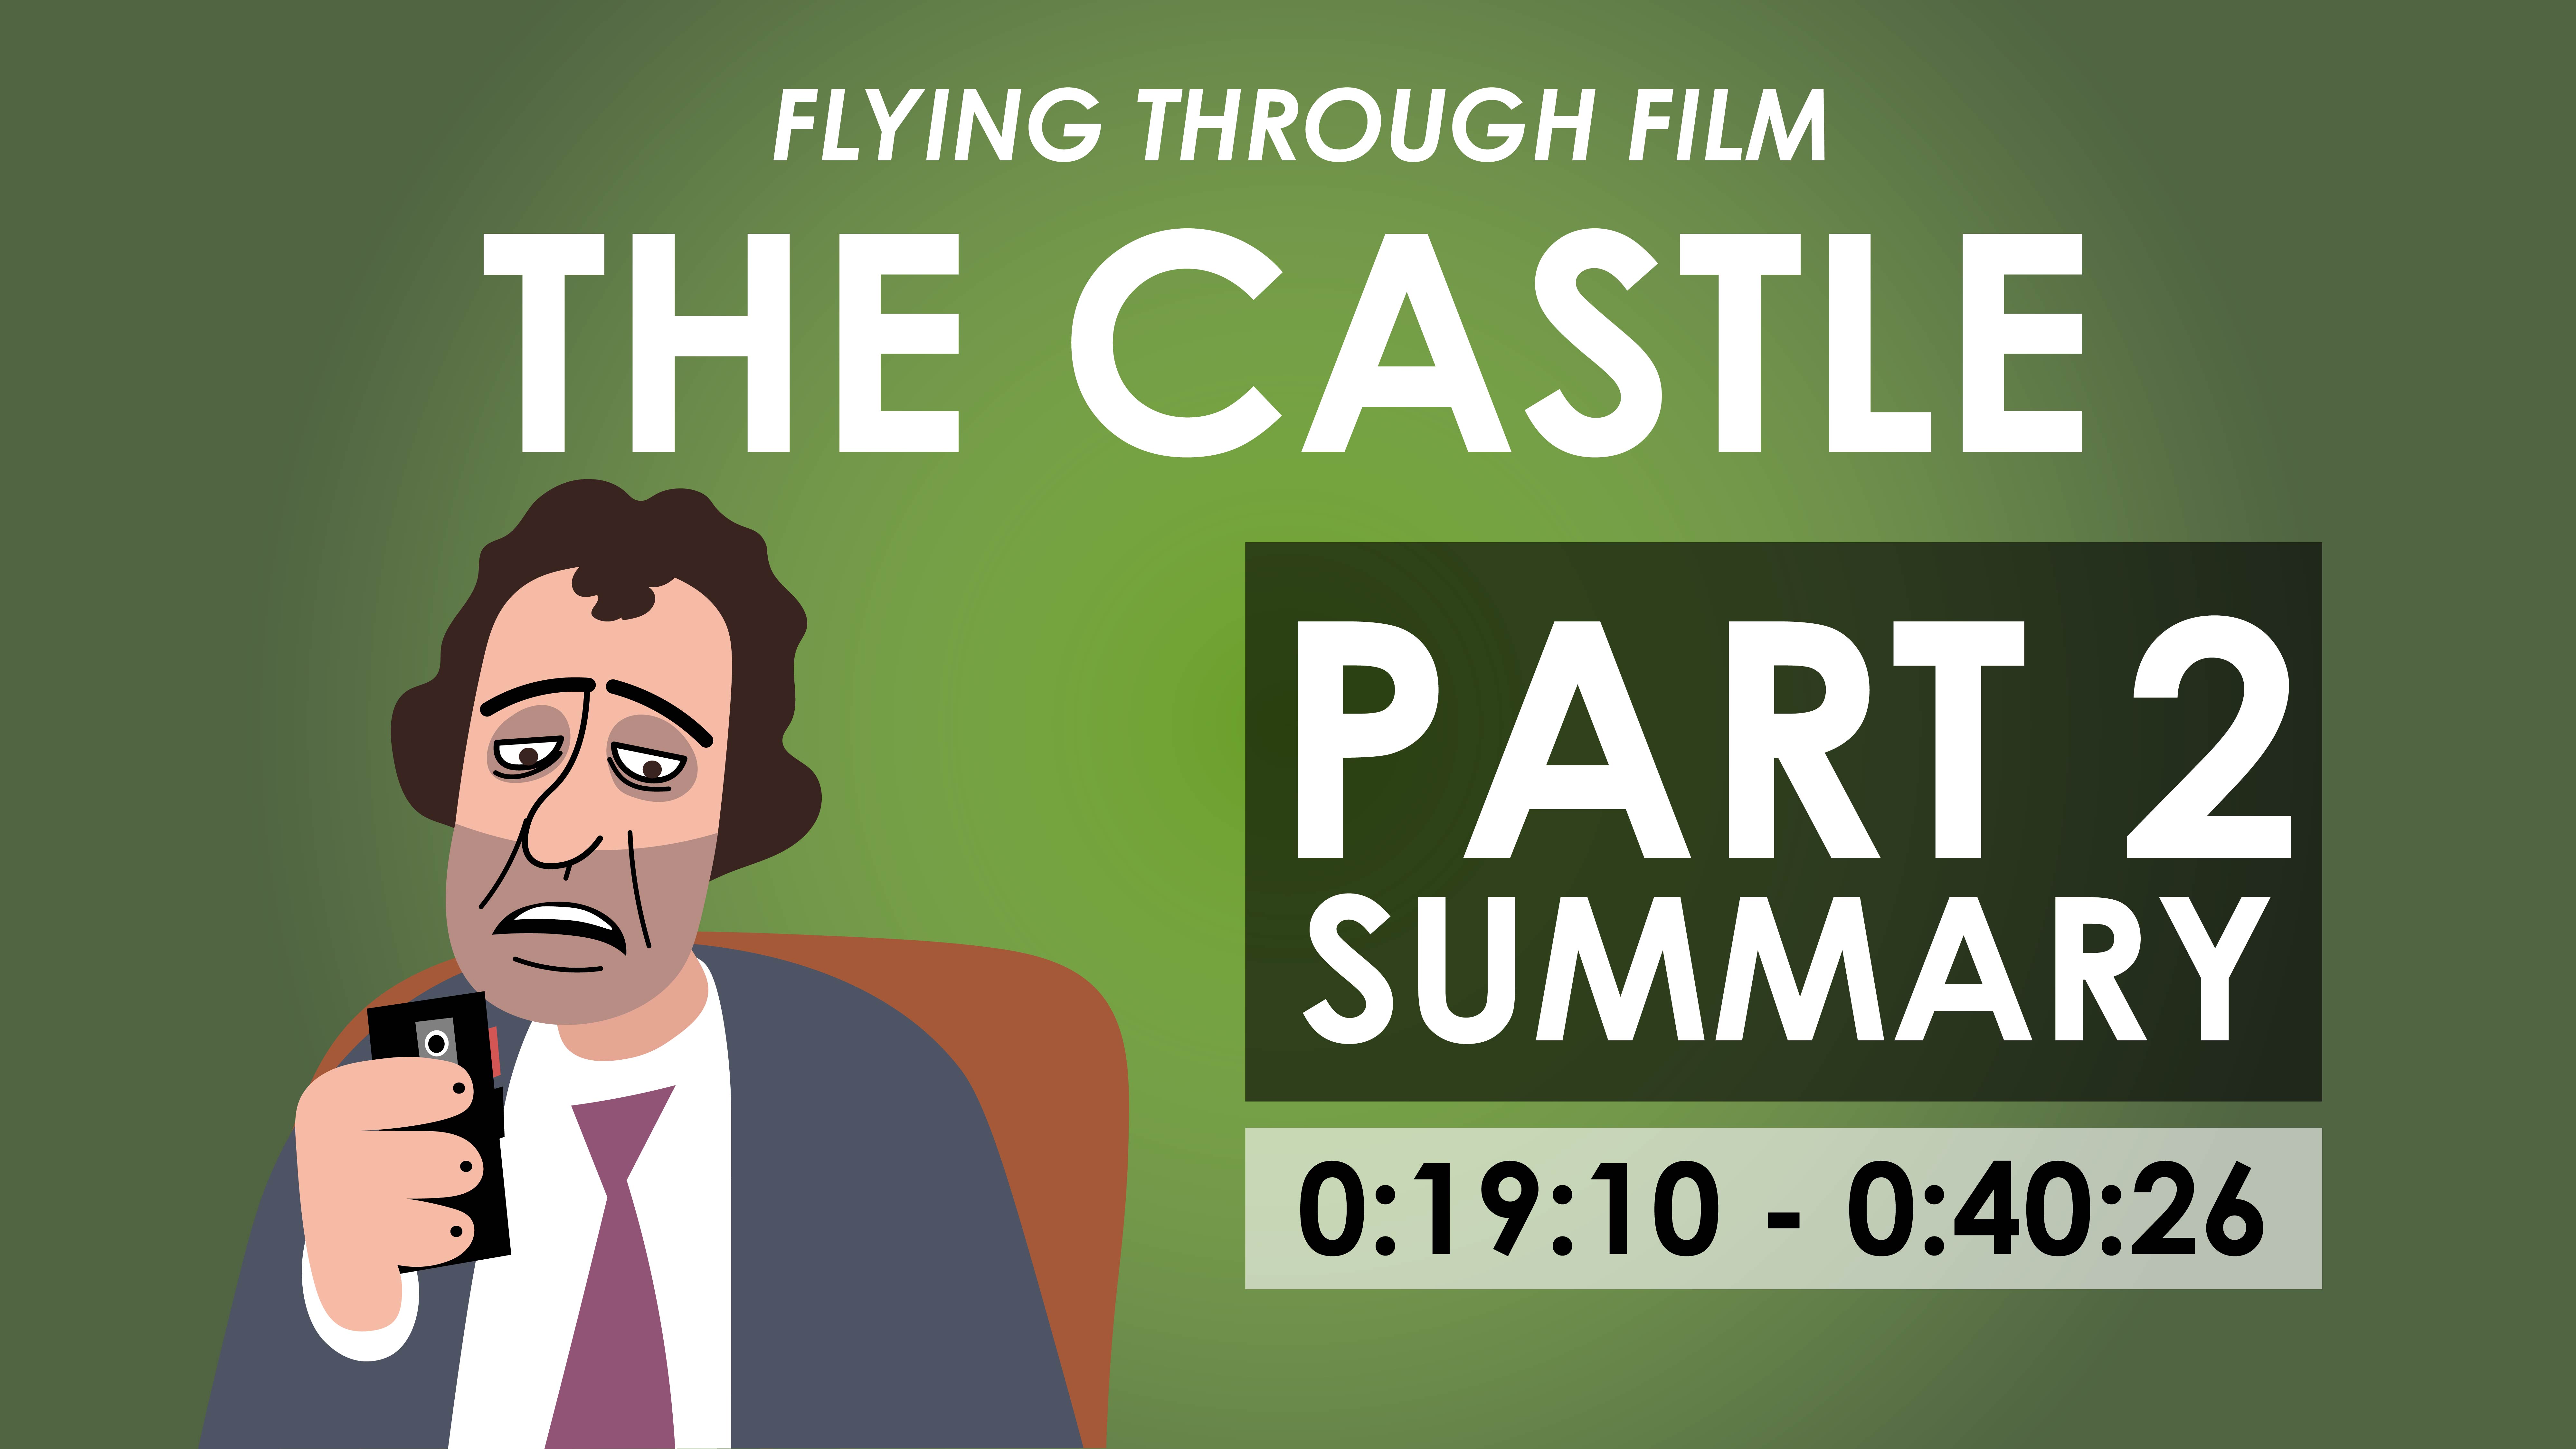 The Castle - Part 2 Summary (0:19:10-0:40:26) - Flying Through Film Series